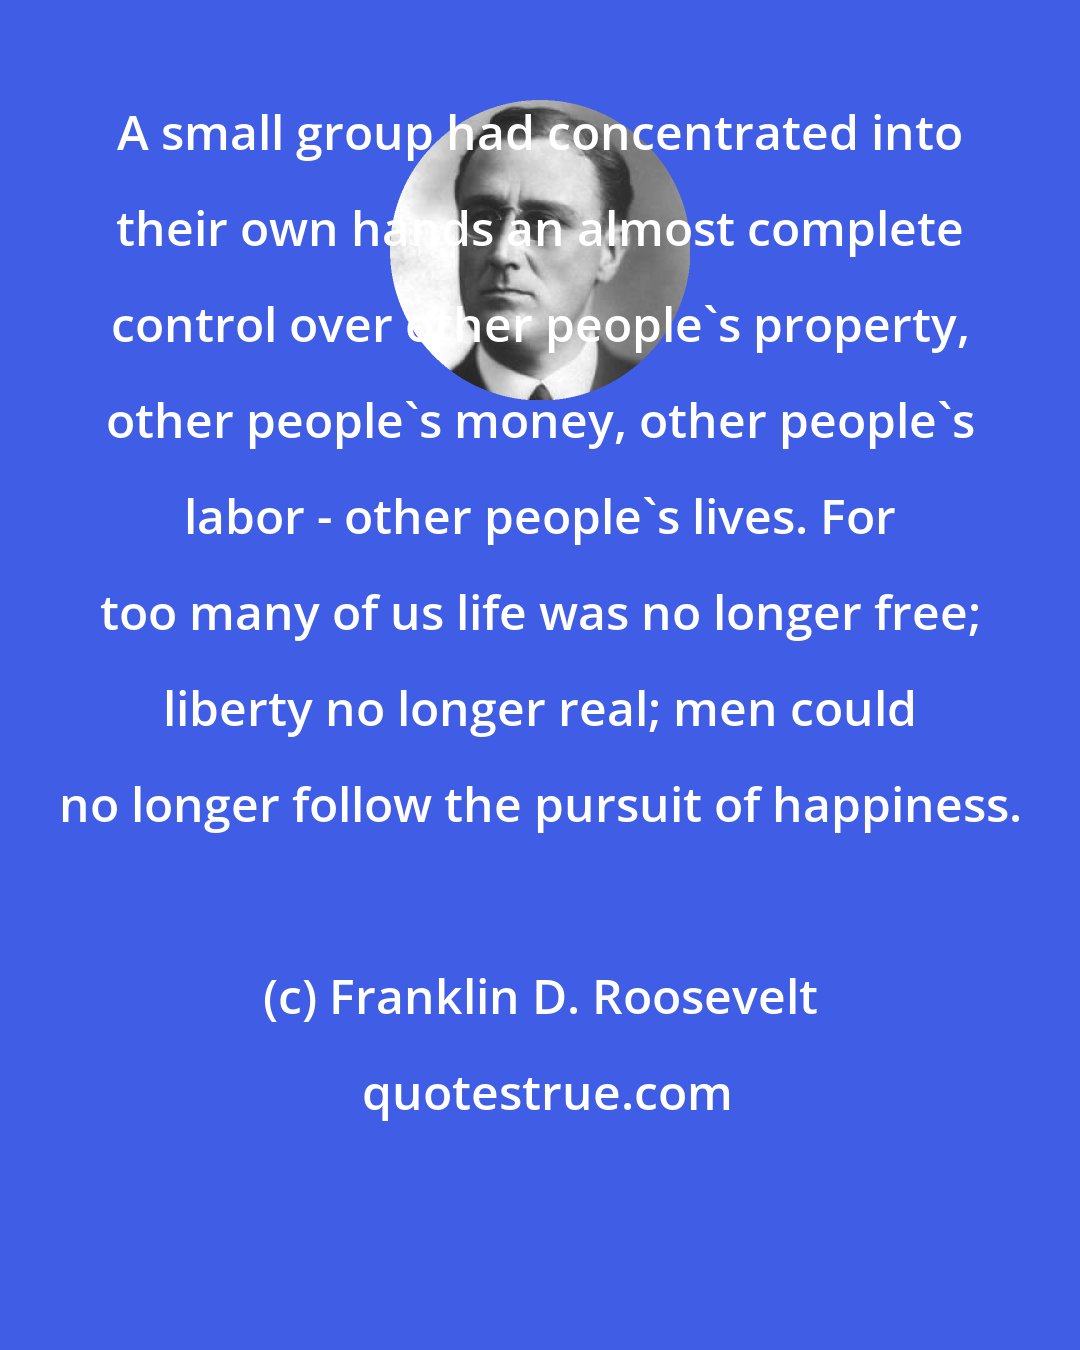 Franklin D. Roosevelt: A small group had concentrated into their own hands an almost complete control over other people's property, other people's money, other people's labor - other people's lives. For too many of us life was no longer free; liberty no longer real; men could no longer follow the pursuit of happiness.